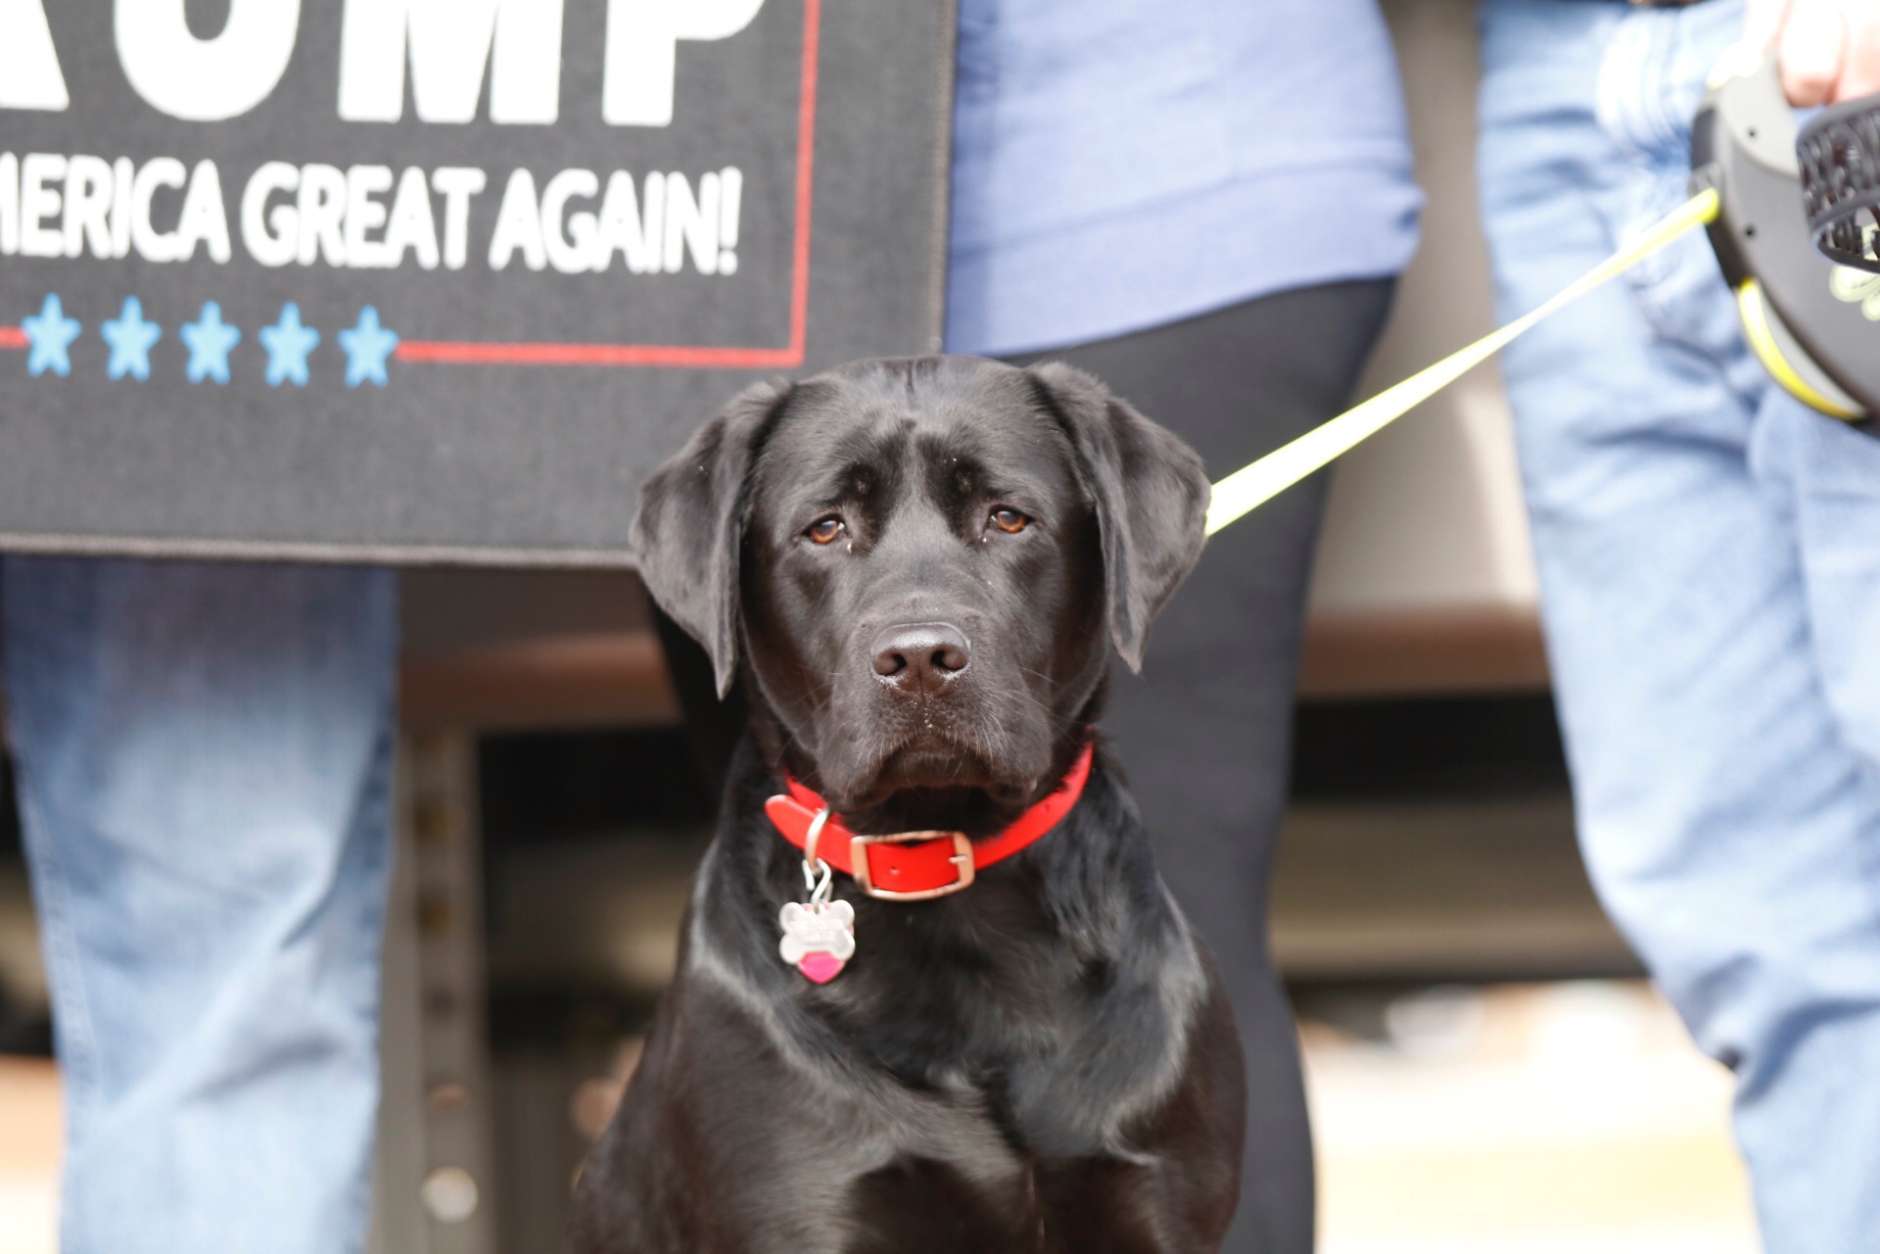 Charlie the chocolate lab was among the Trump supporters at the Cherry Hill Park Campground. (WTOP/Kate Ryan)